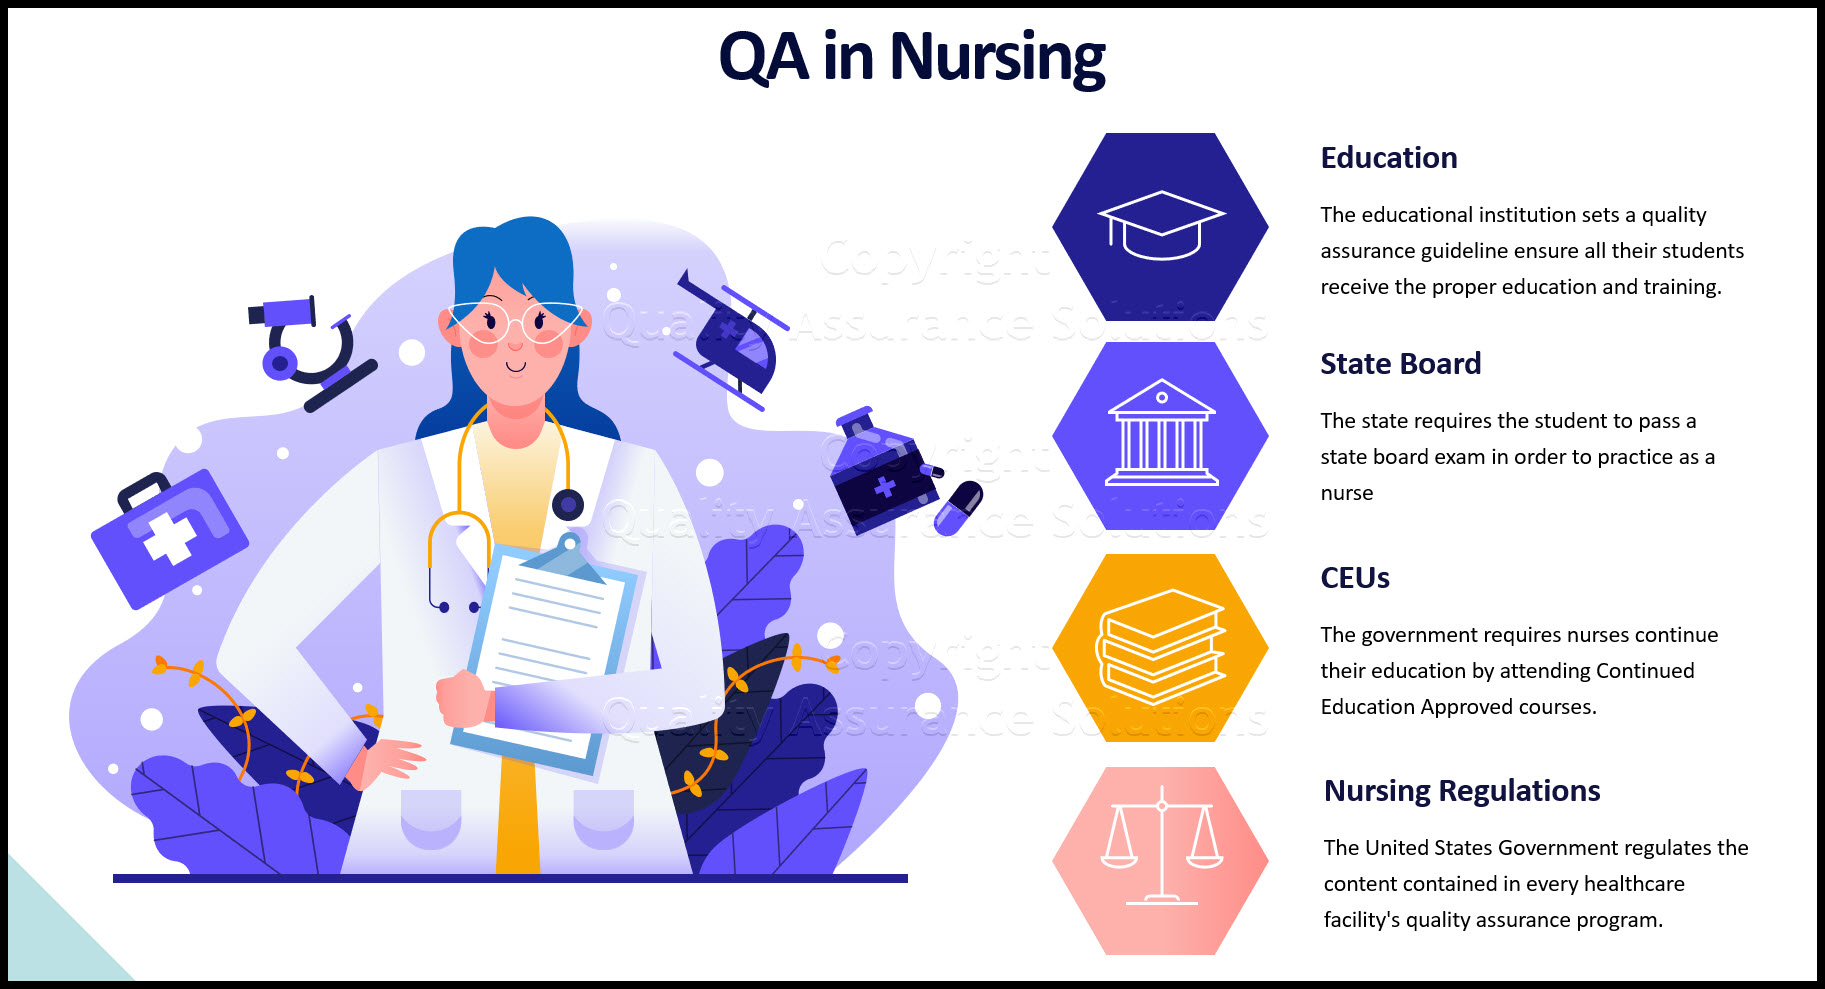 Need quality assurance in nursing info? QA ensures nurses meet internal, state and federal guidelines. Review this page on nursing quality assurance. 